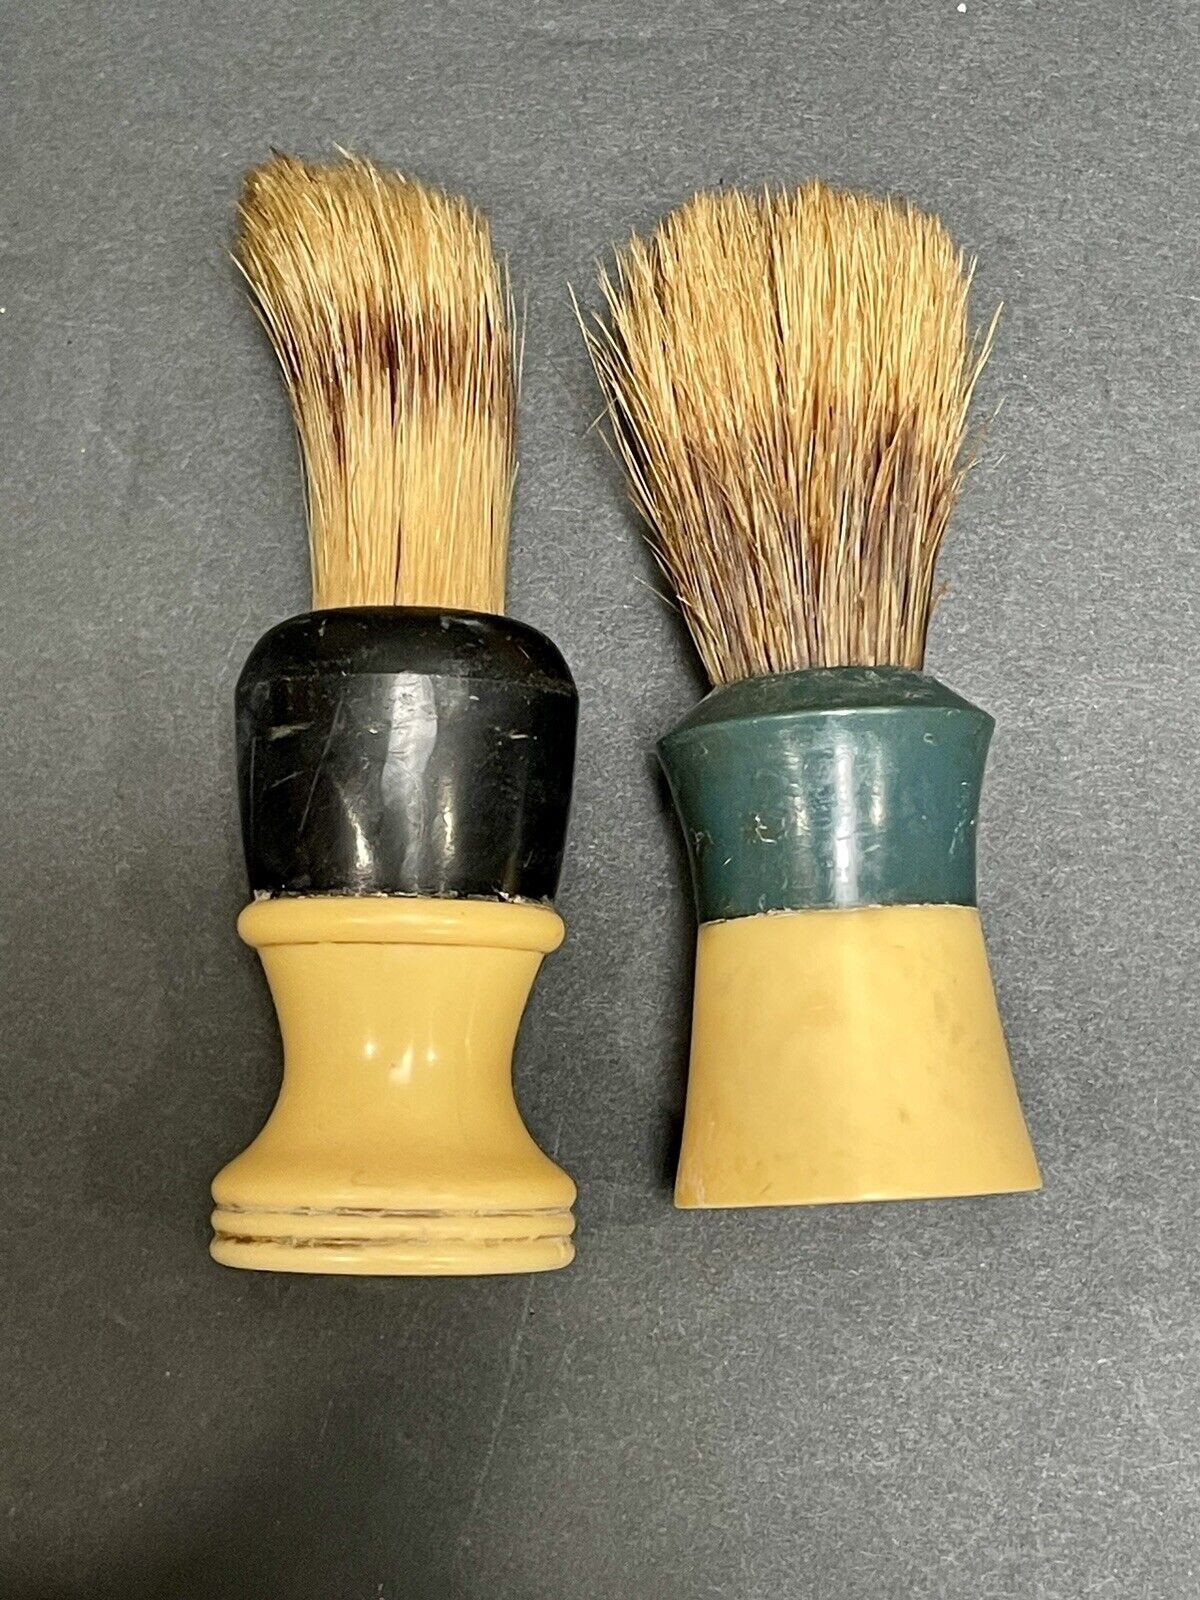 2 VINTAGE EVER-READY STERILIZED SHAVING BRUSH 1 is 200T MADE IN USA Rare